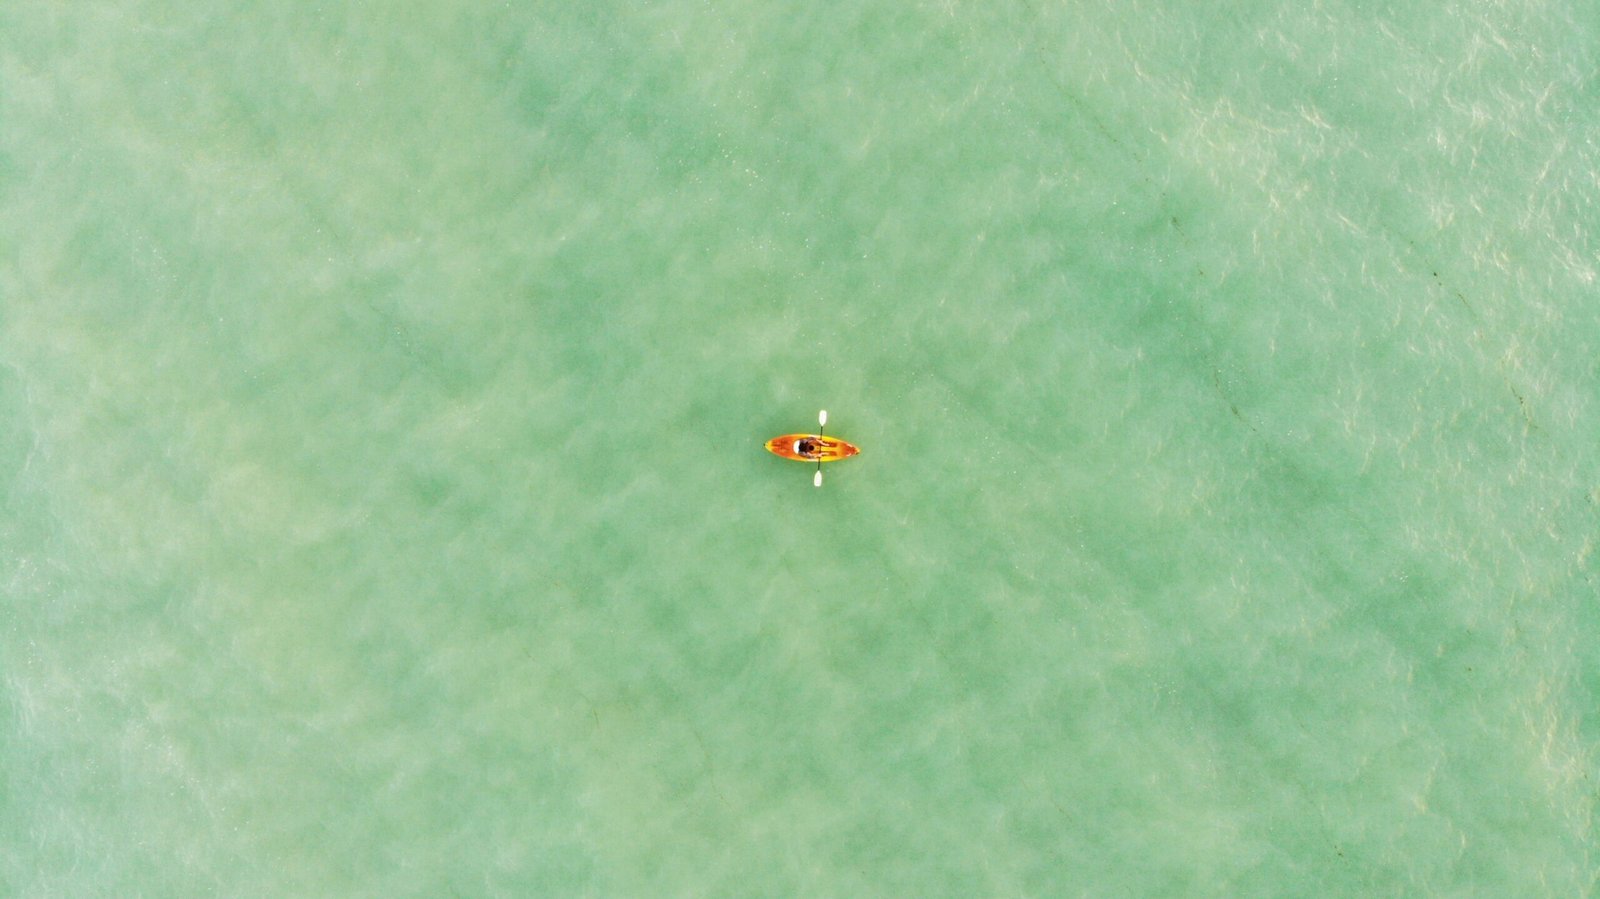 aerial view of boat on body of water